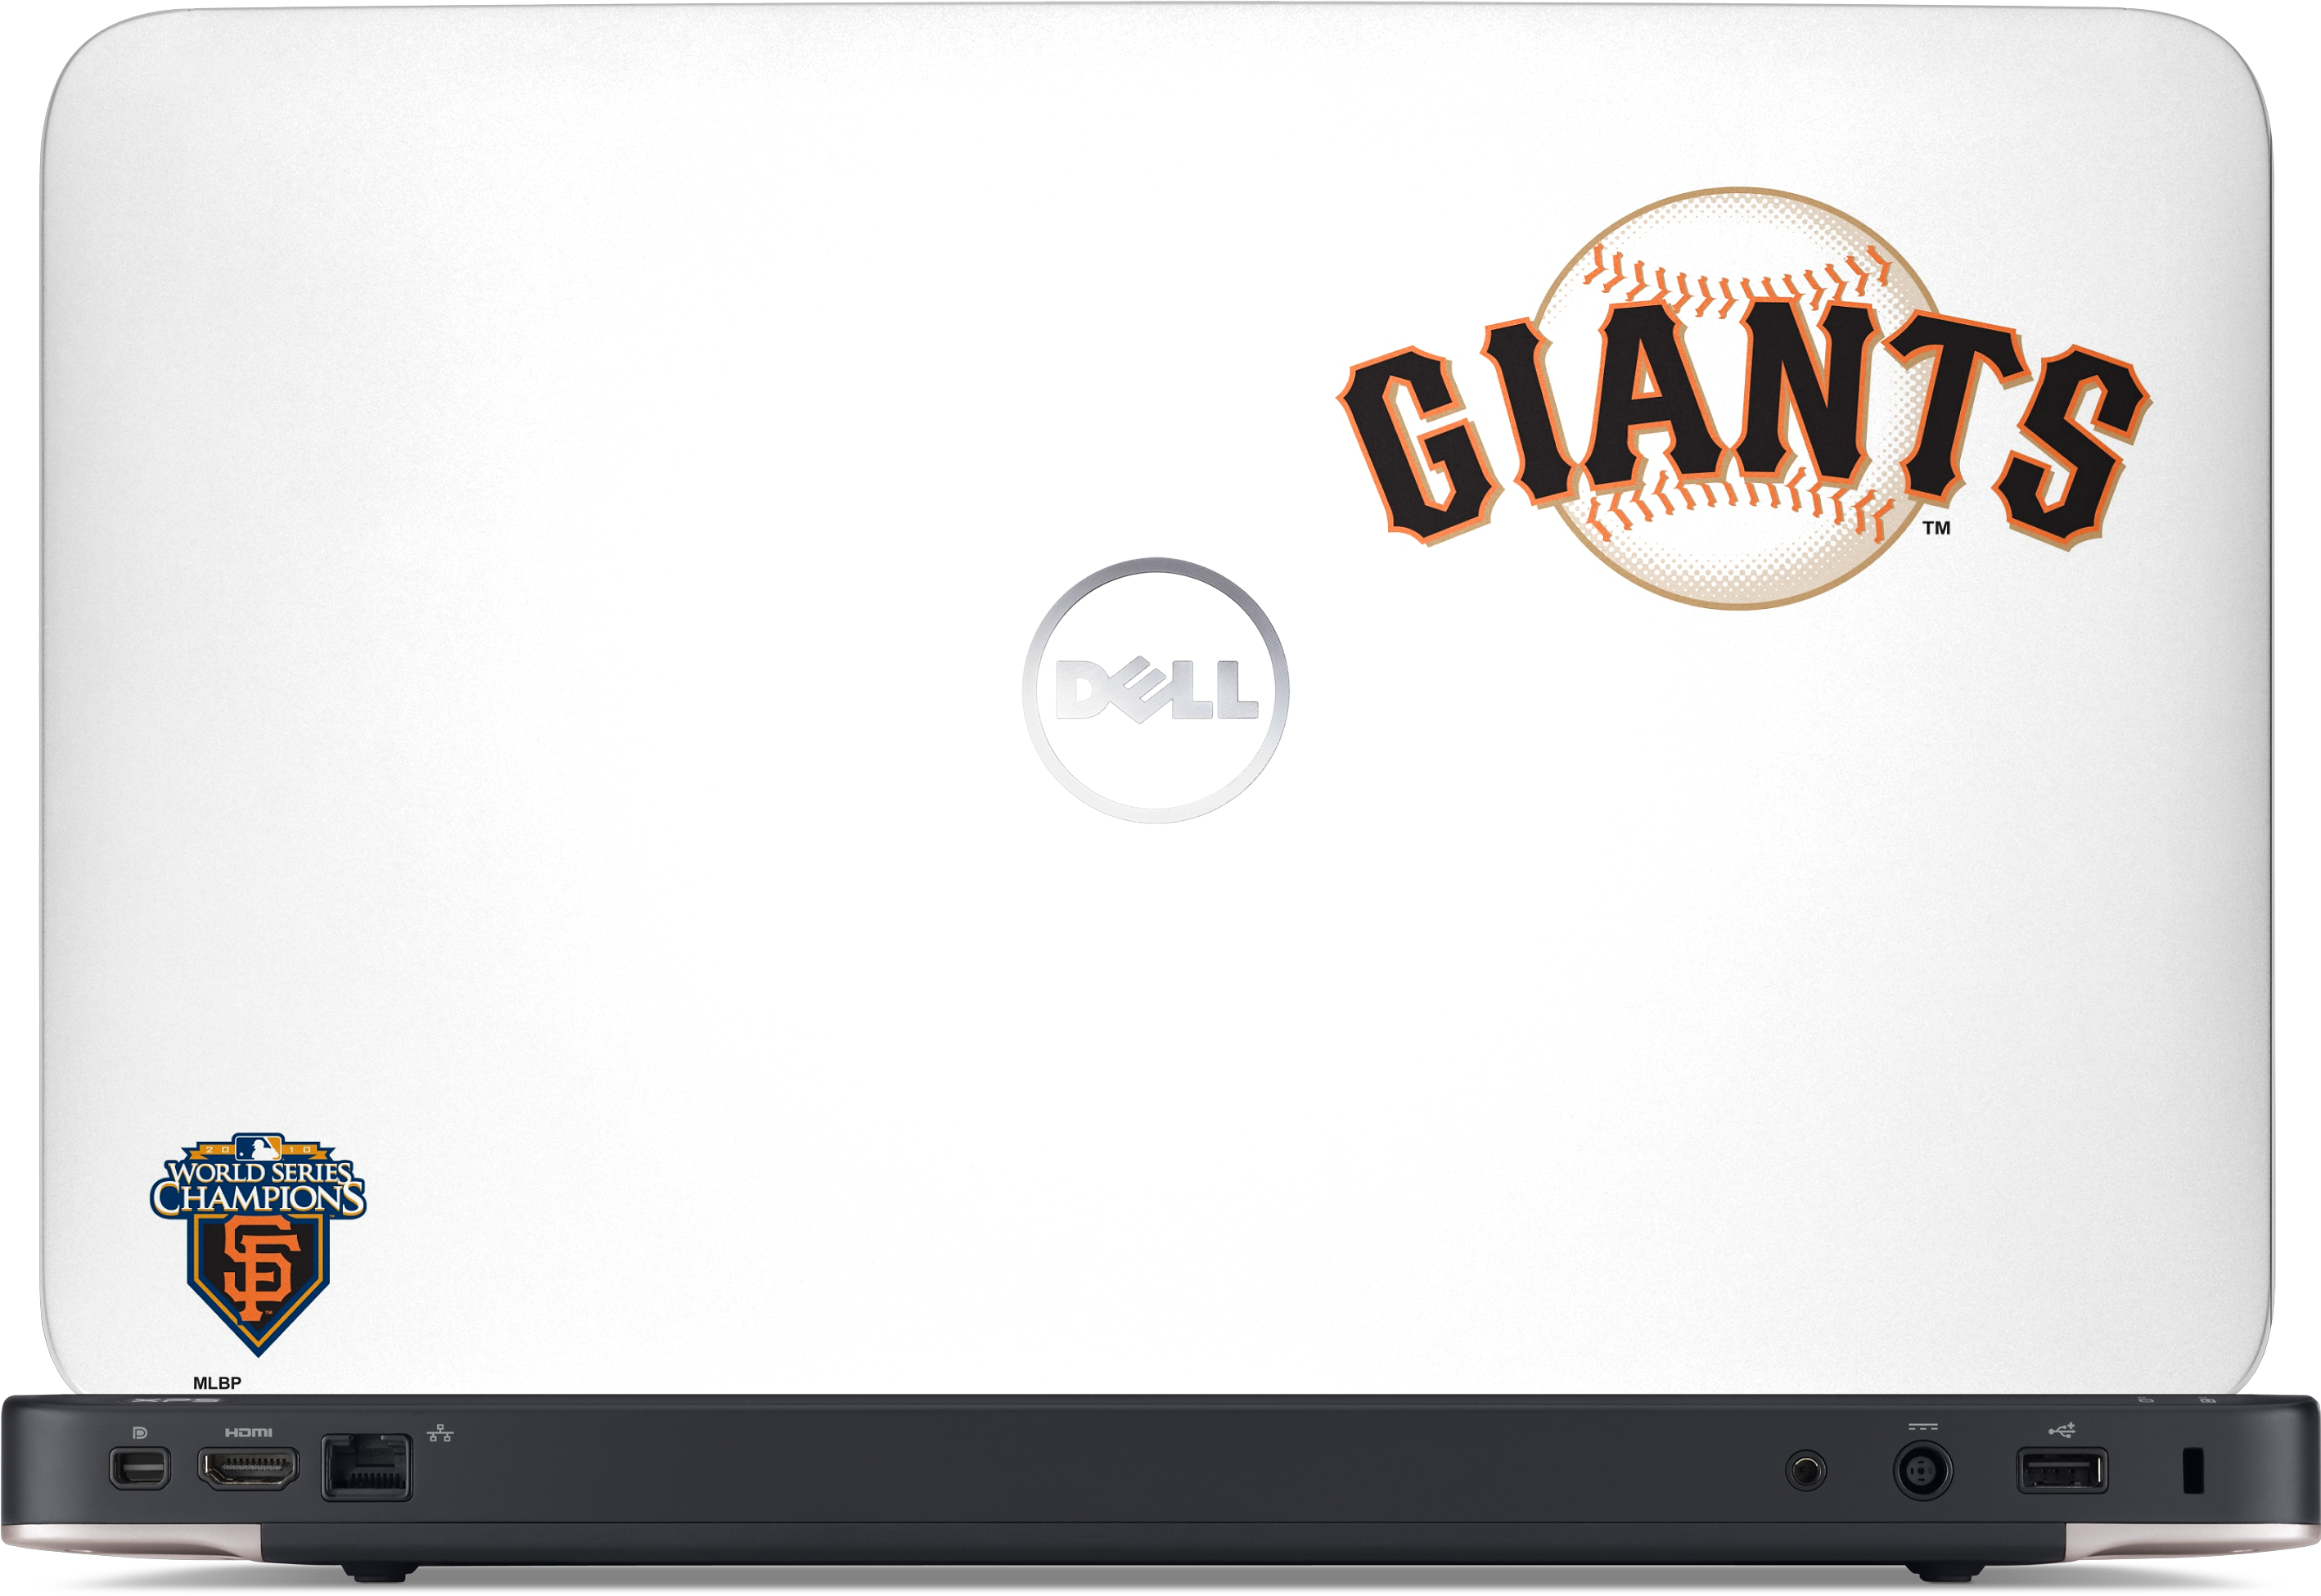 Dell - San Francisco Giants (3000x2250), Png Download